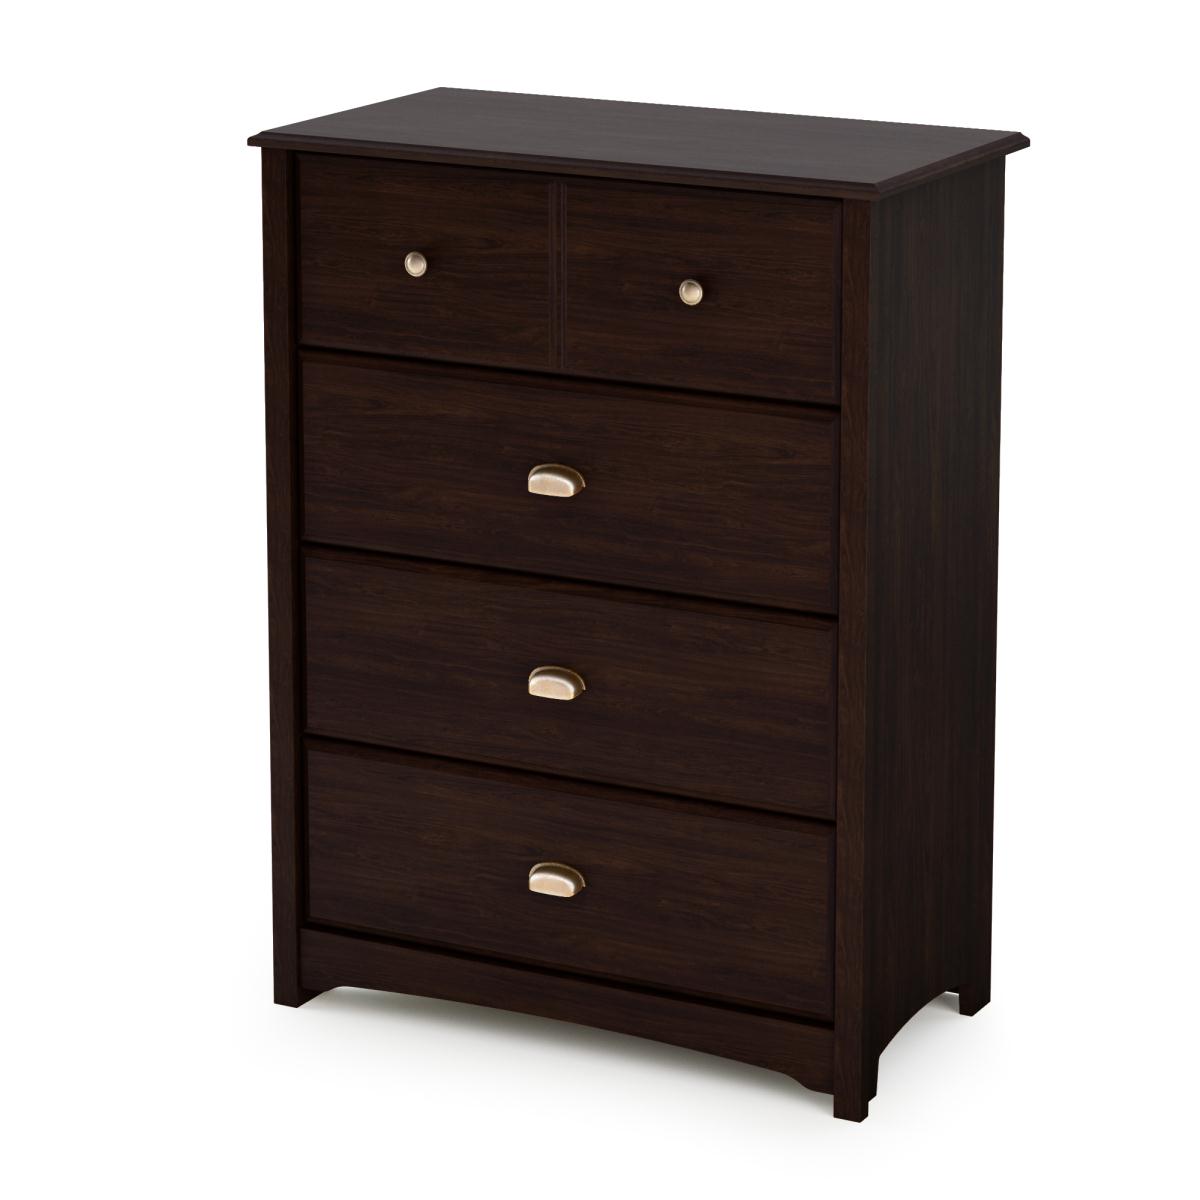 South Shore Willow 4 Drawer Chest - Havana